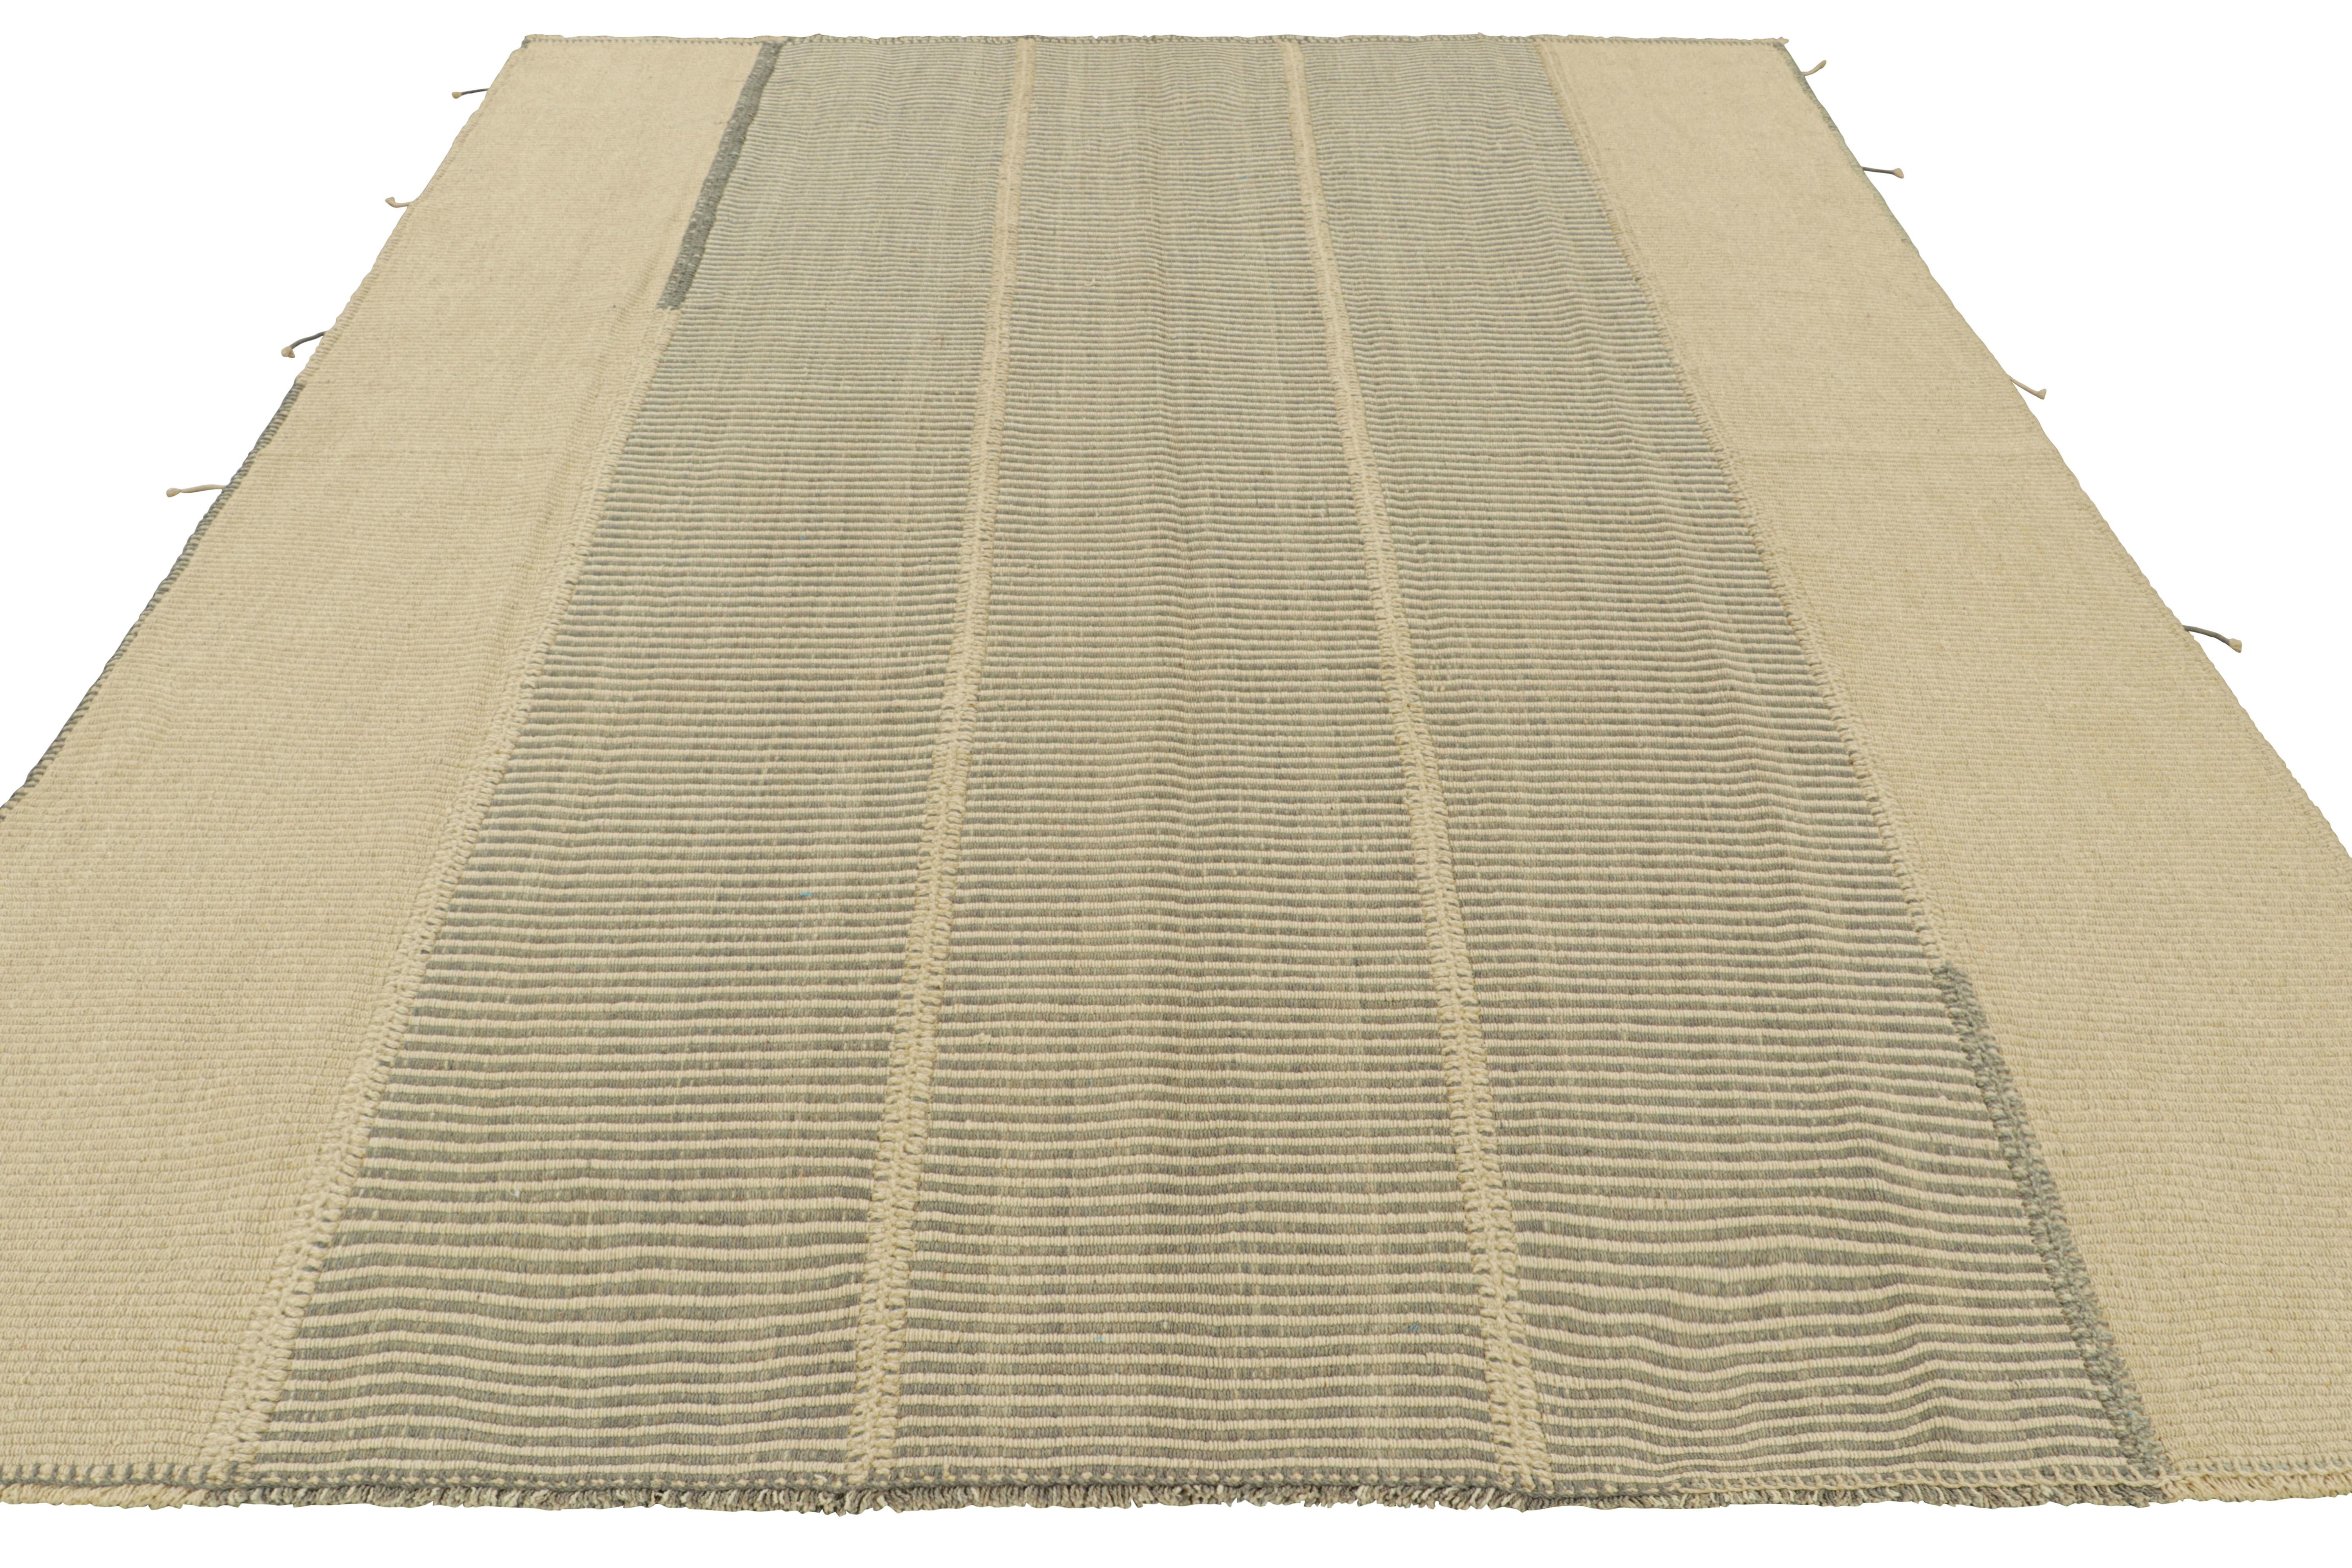 Hand-Woven Rug & Kilim’s Contemporary Kilim in Cream White and Gray Textural Stripes For Sale